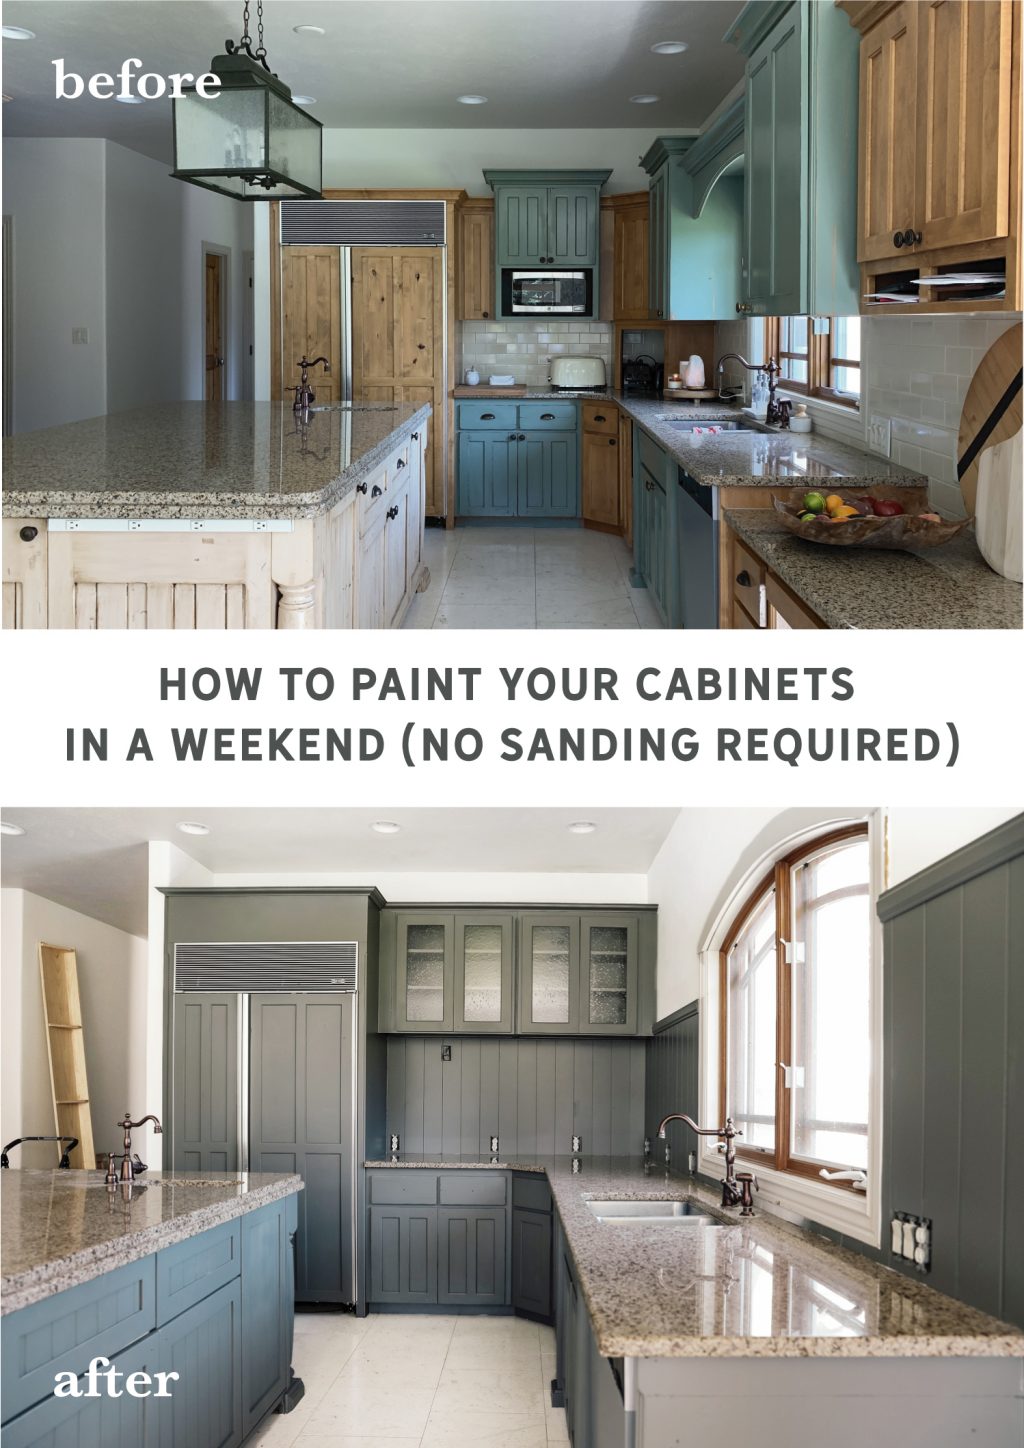 How To Paint Your Cabinets In A Weekend, Spray Paint Your Kitchen Cabinets